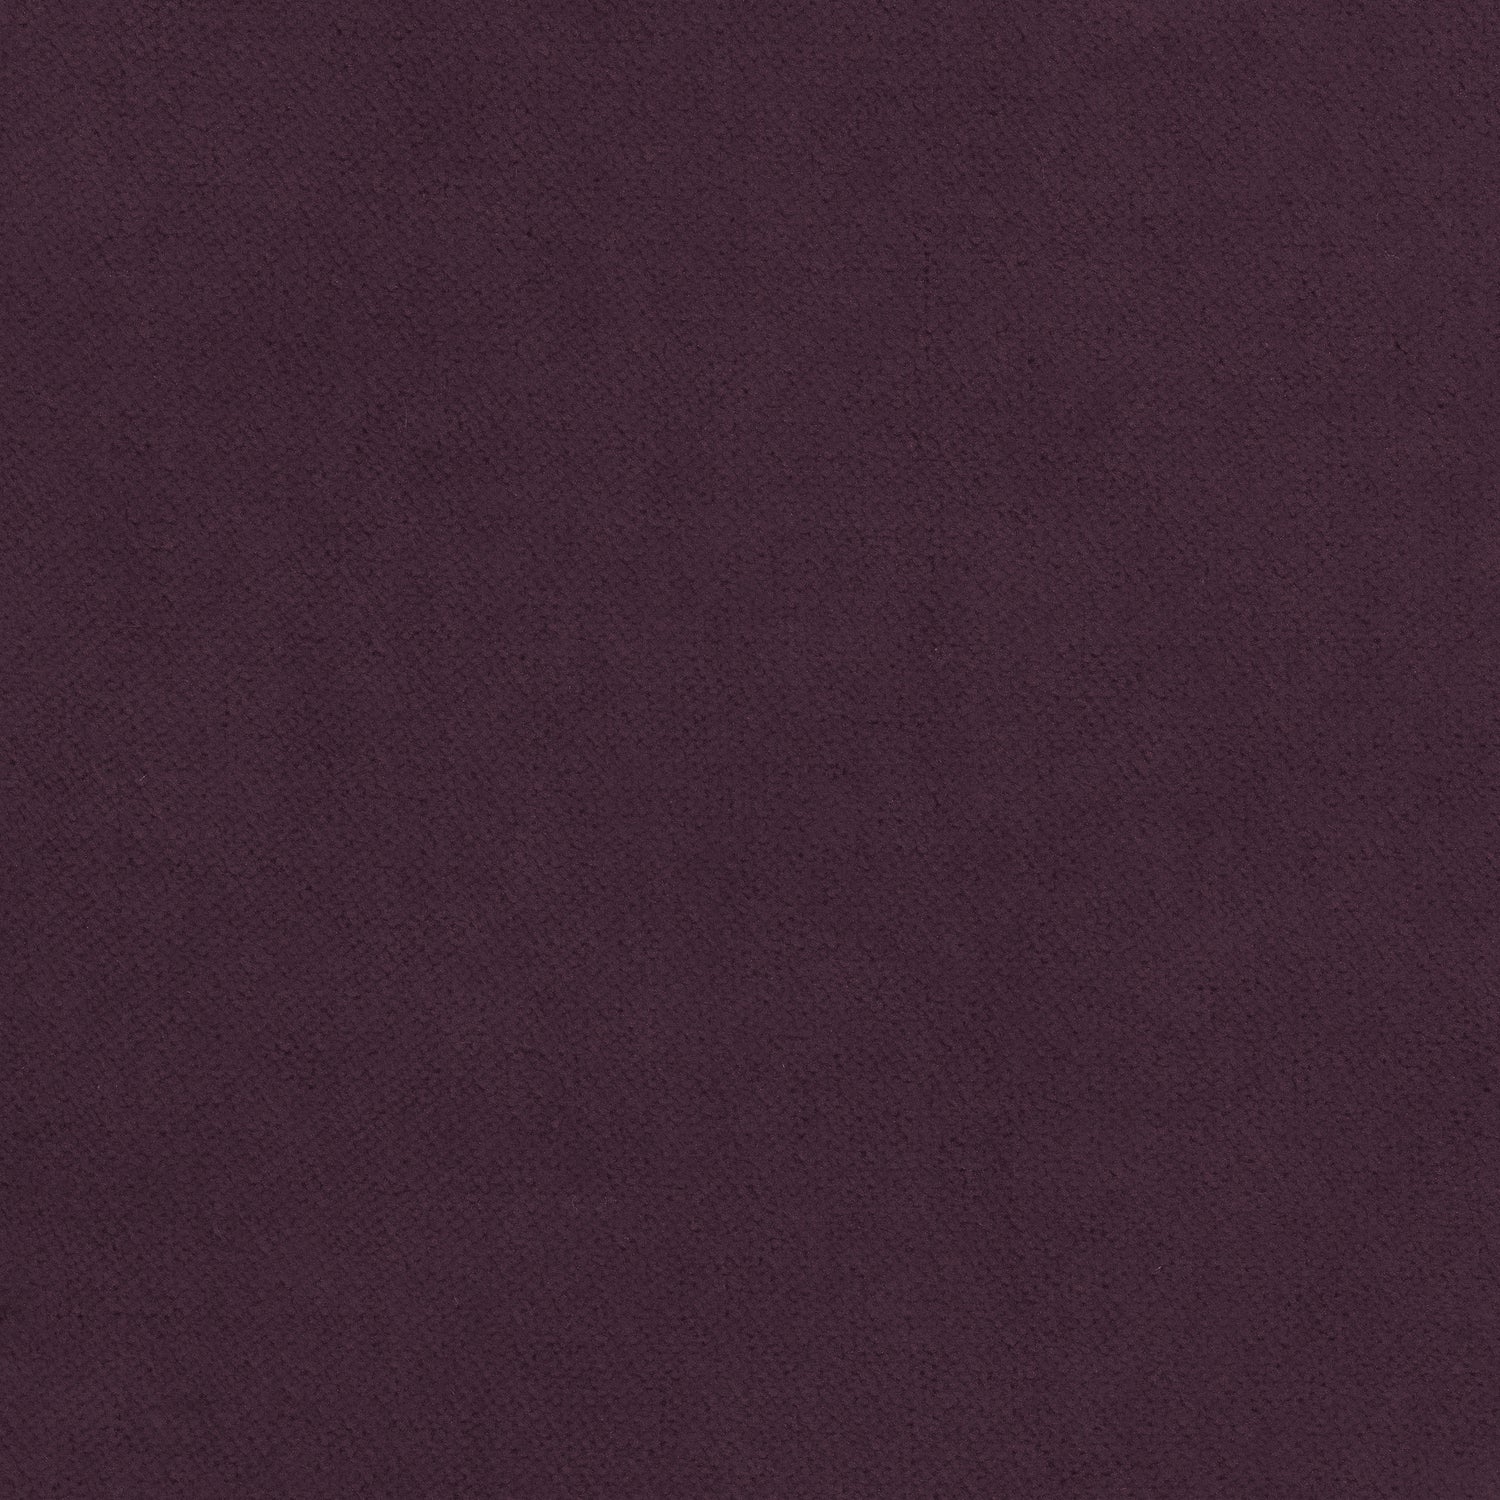 Club Velvet fabric in amethyst color - pattern number W7212 - by Thibaut in the Club Velvet collection